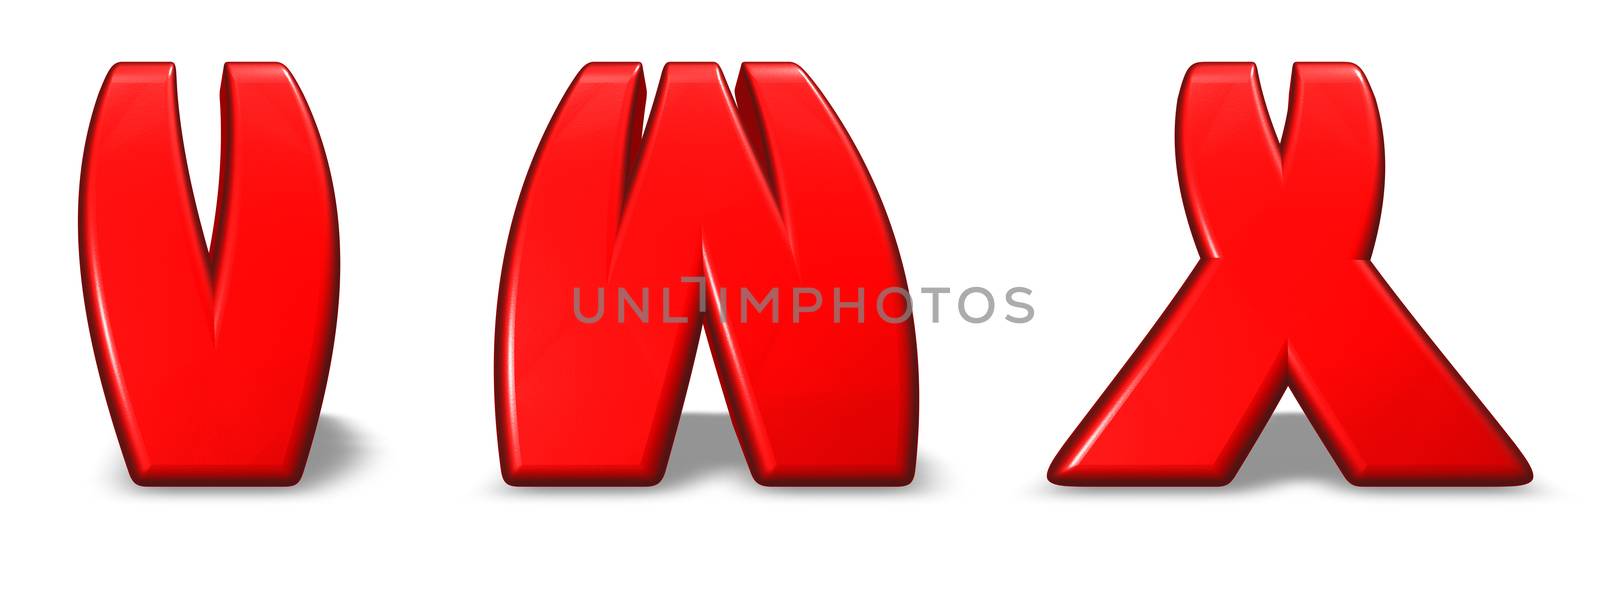 red letters v, w and x on white background - 3d illustration